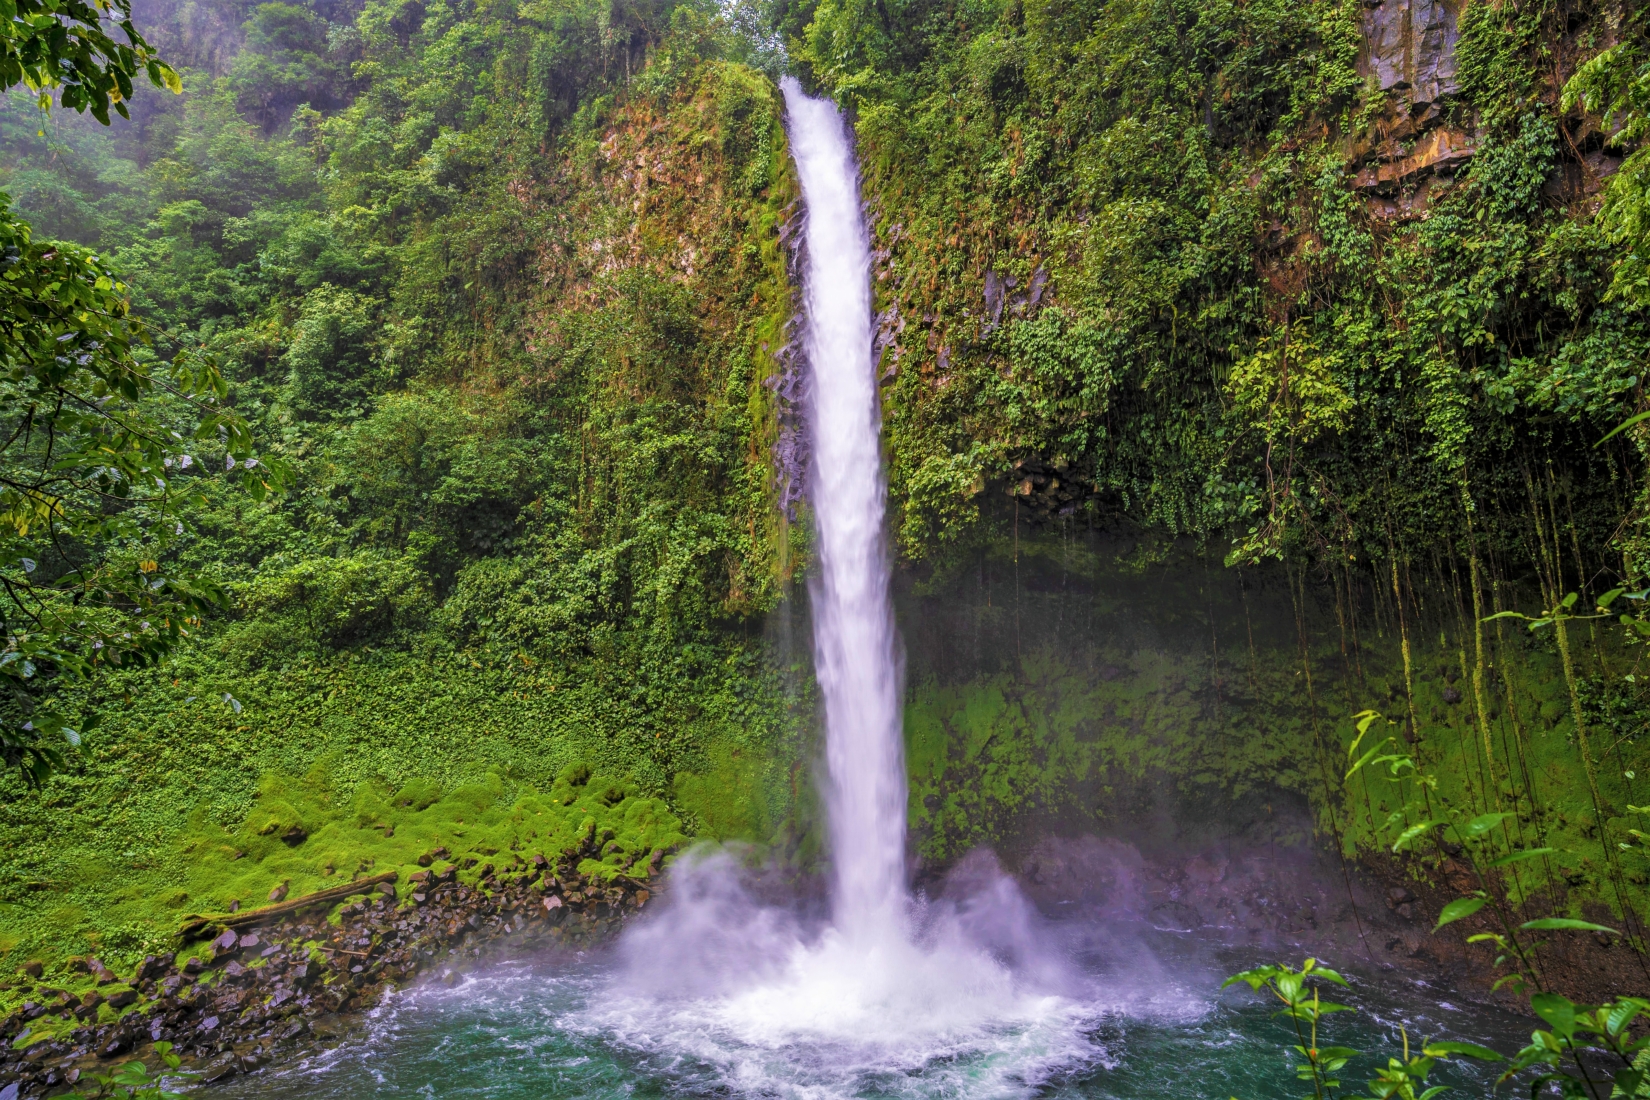 Water surging down the La Fortuna Waterfall into a body of water in Costa Rica